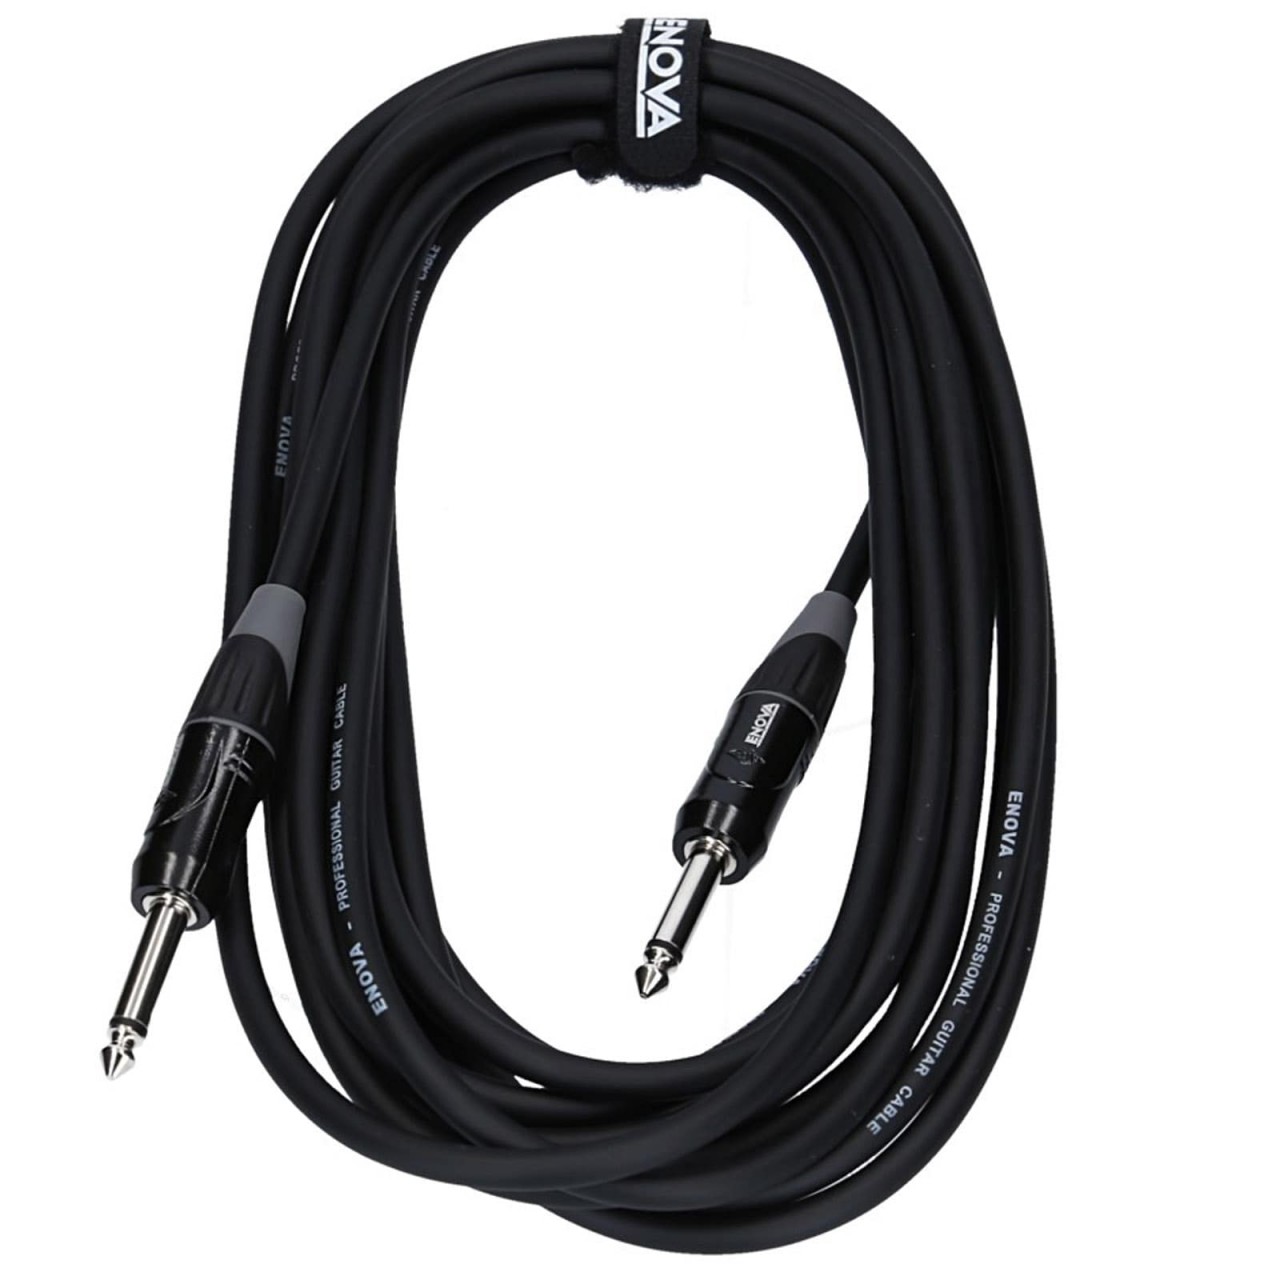 Instrument cable with 6.3 mm jack connector 6 meters